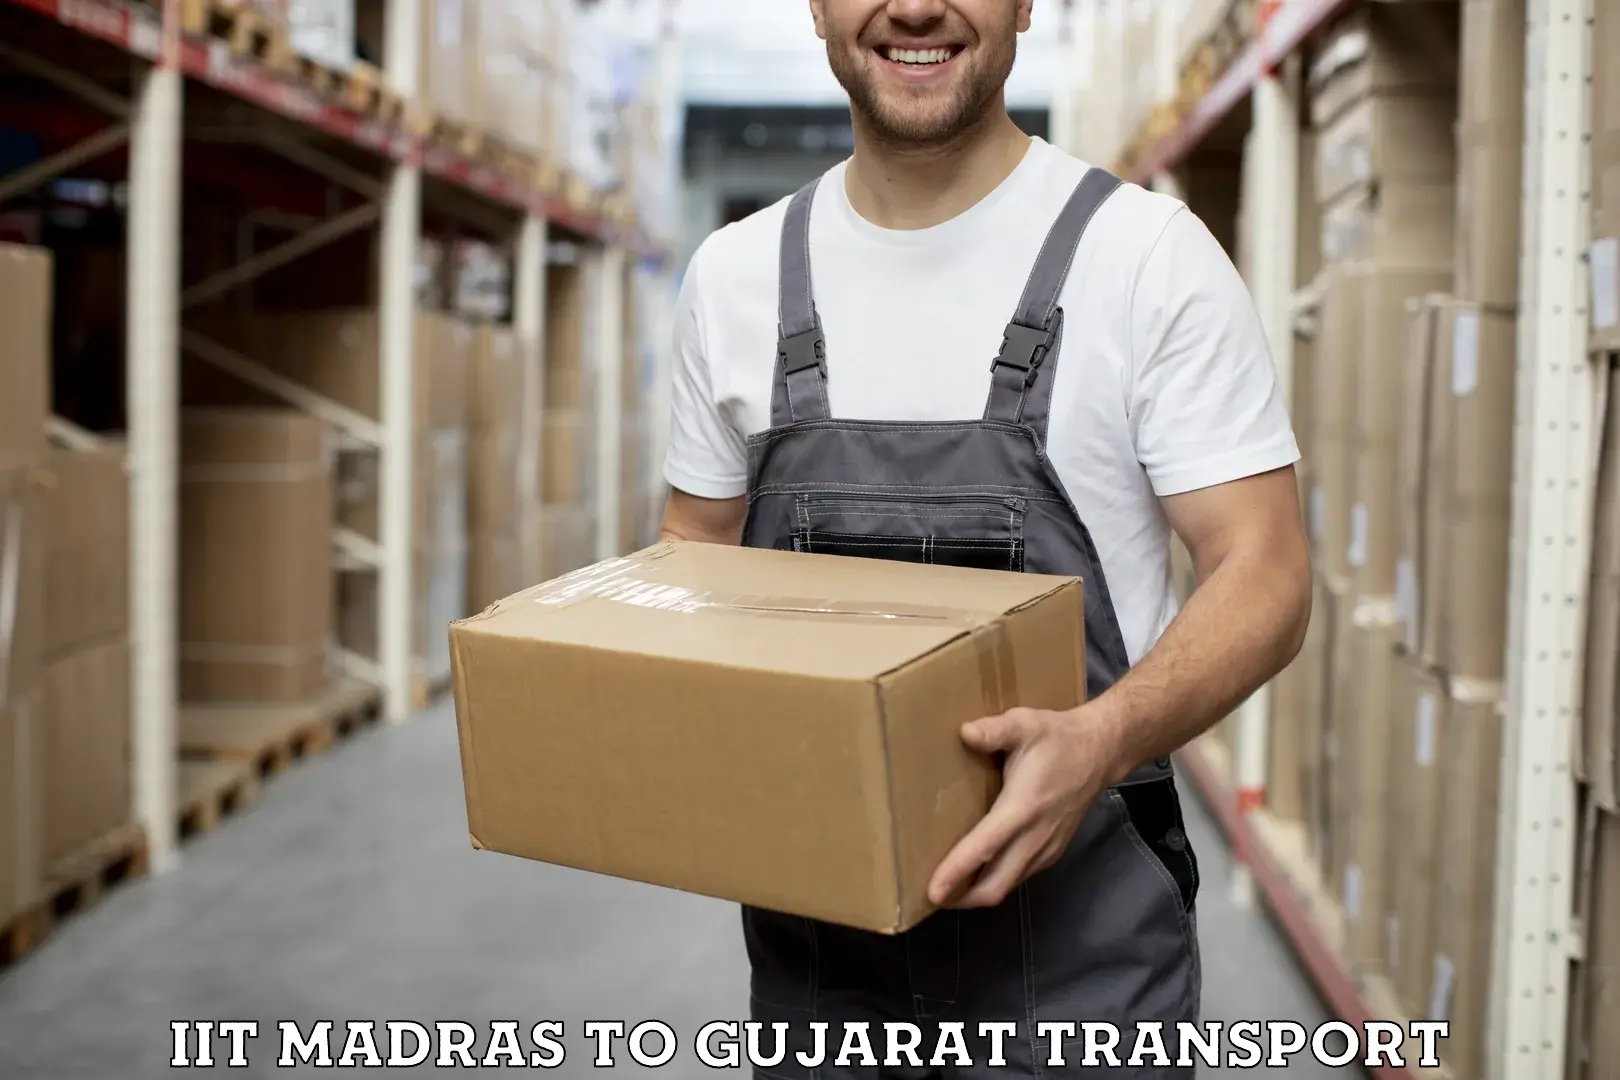 Delivery service IIT Madras to Veraval